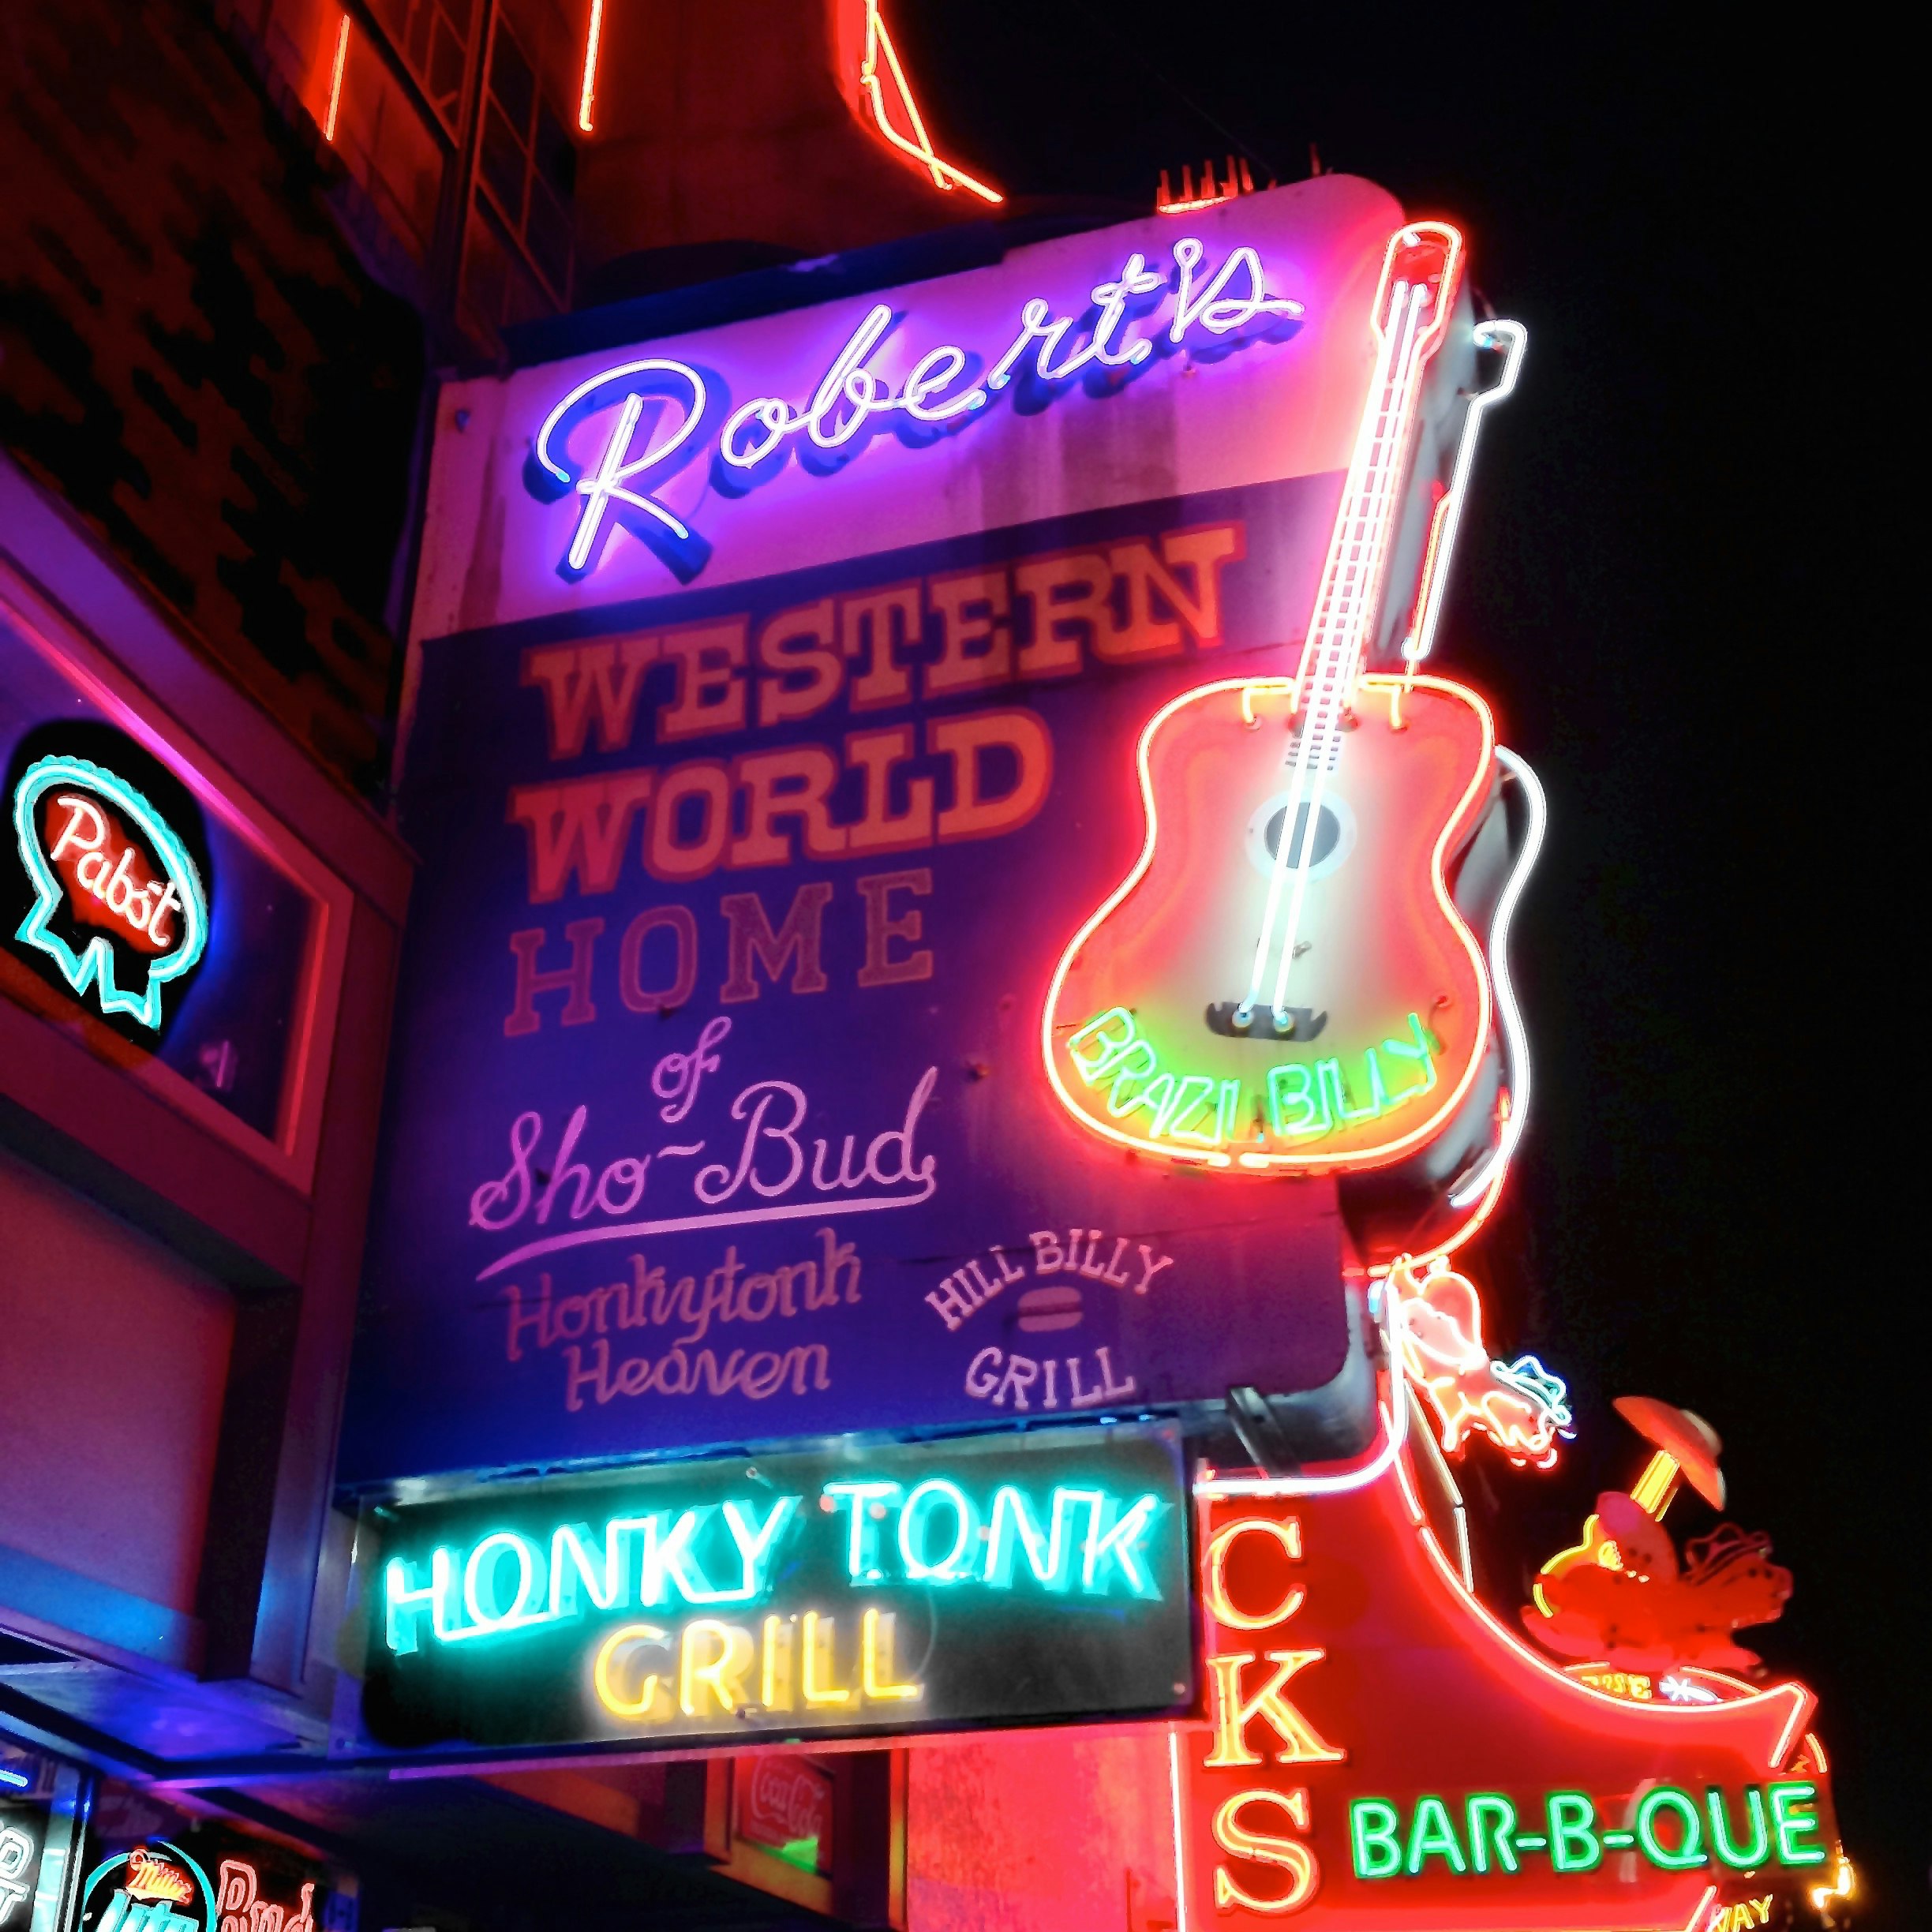 500px Photo ID: 130830891 - Perhaps the most famous of the honky tonk bars in downtown Nashville. Live bluegrass music every night, on Broadway.